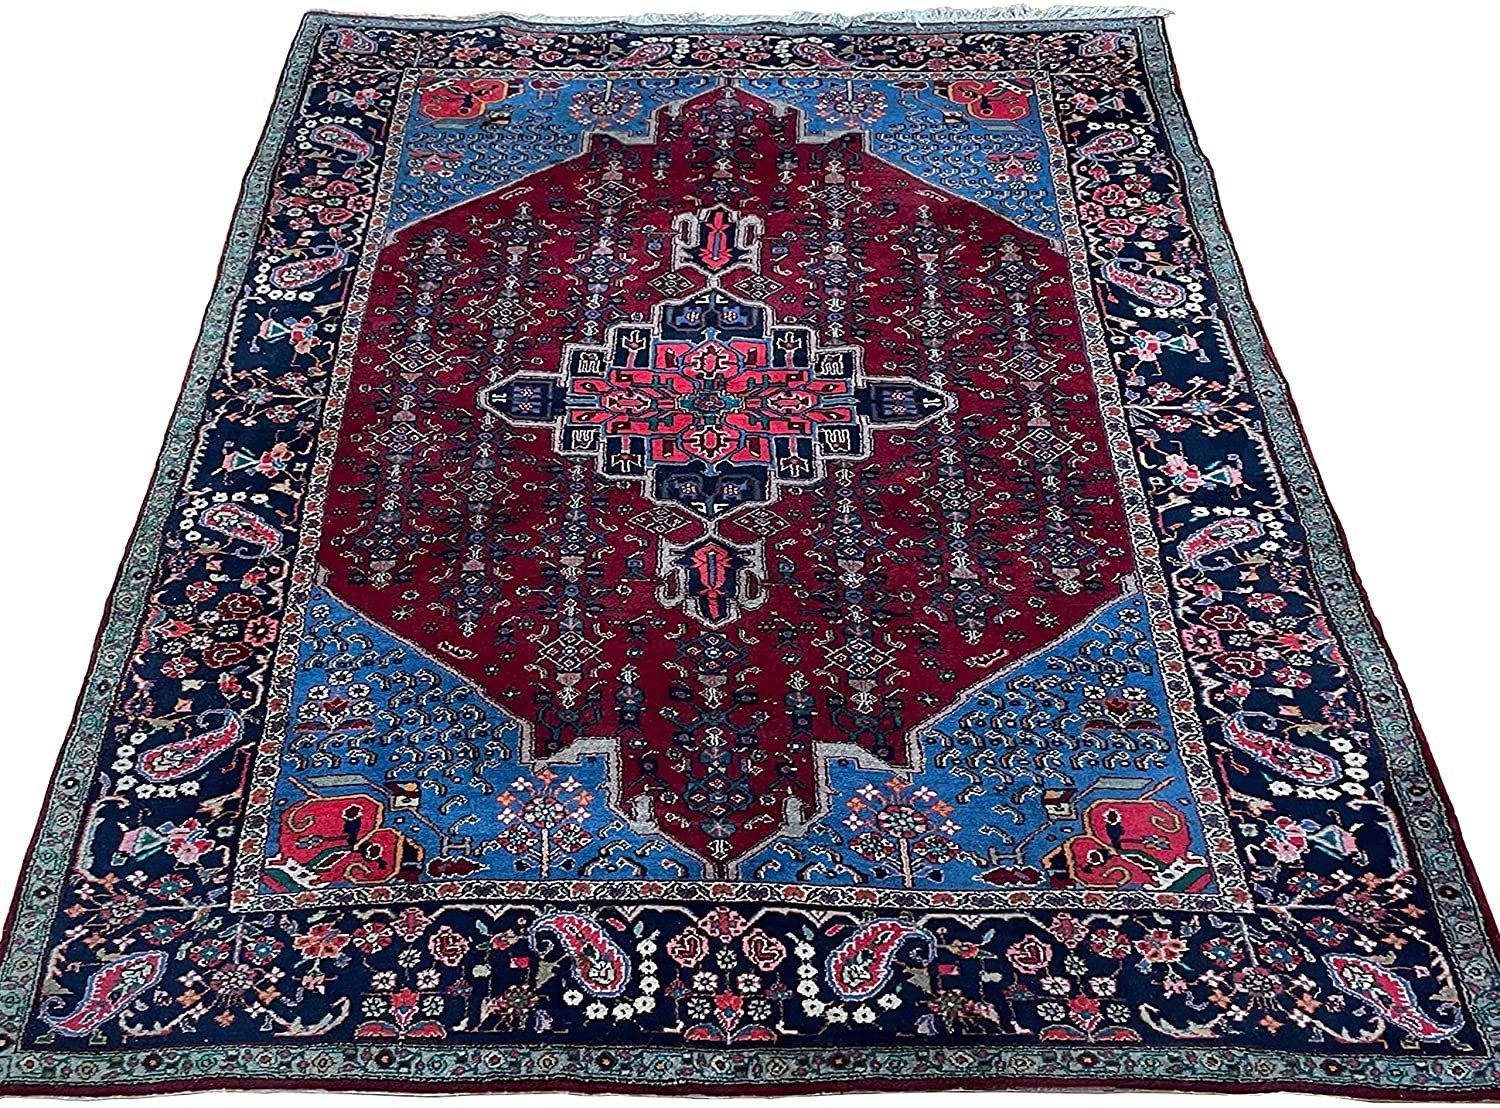 Authentic Handmade fine Turkish Rug-Real Wool Allover Floral Pattern Faded/Vintage-Red/Blue/Multocolor-(6.8" by 10.8")